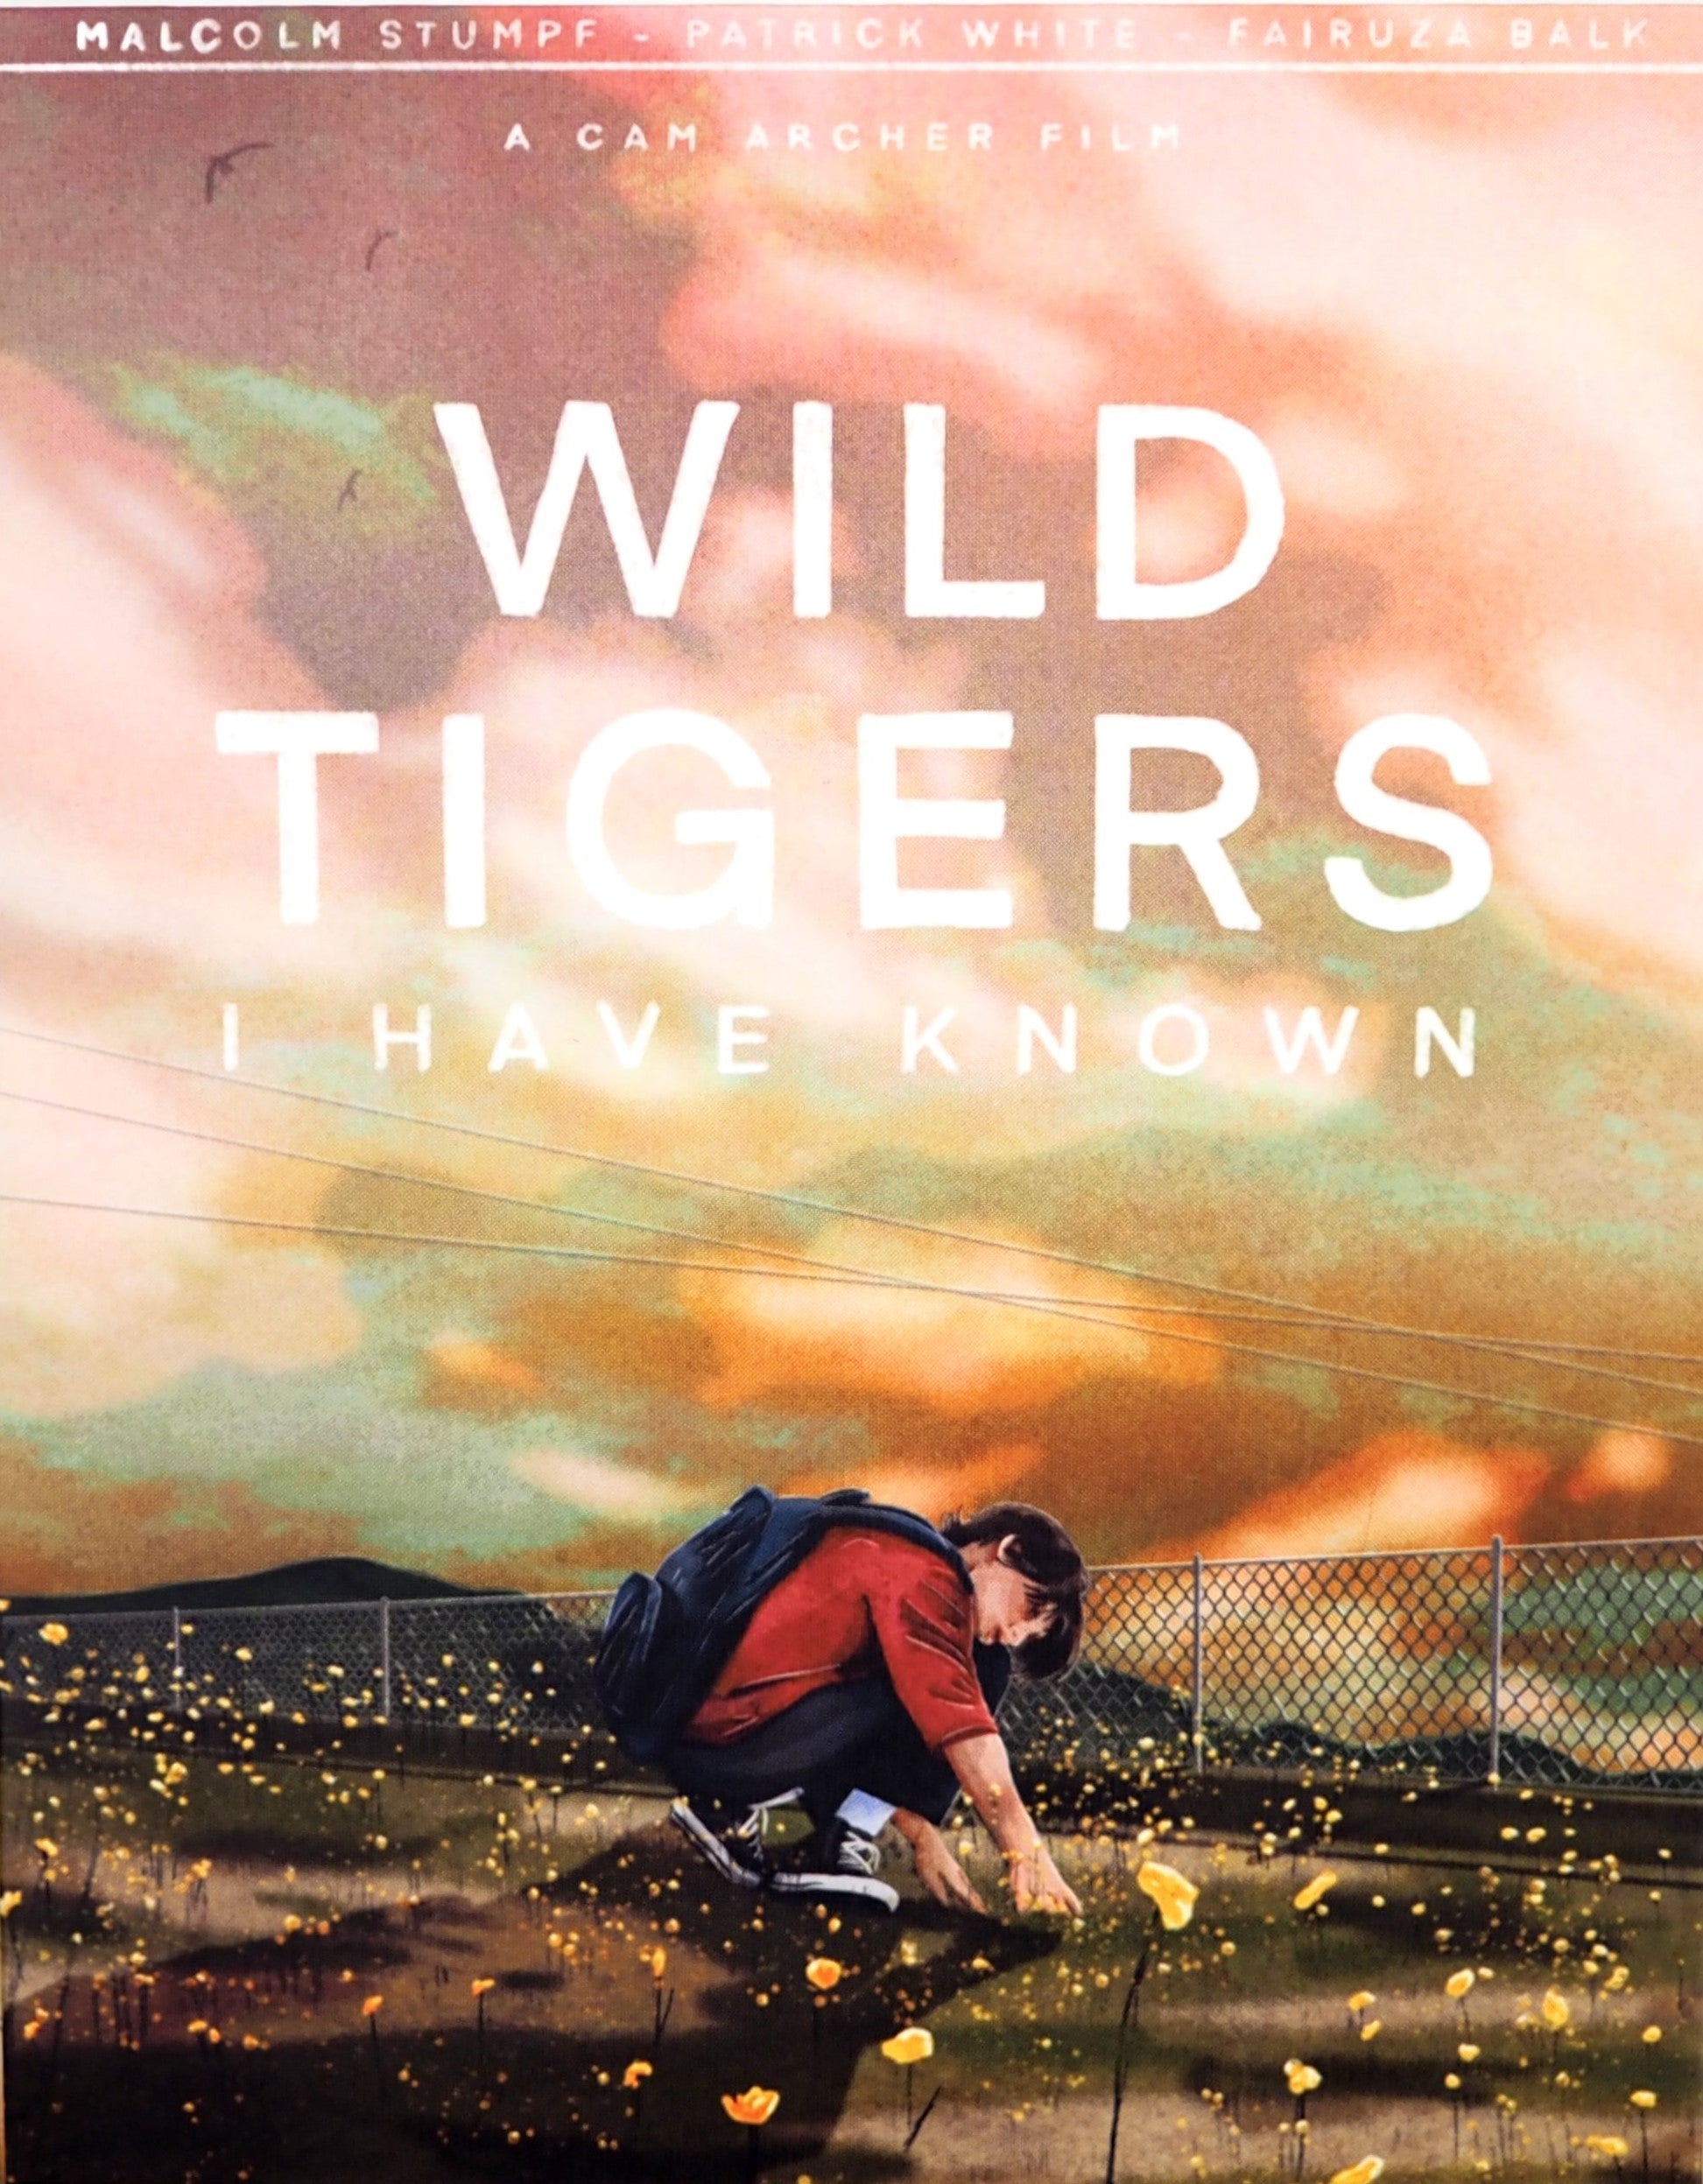 Wild Tigers I Have Known (Limited Edition) Blu-Ray Blu-Ray